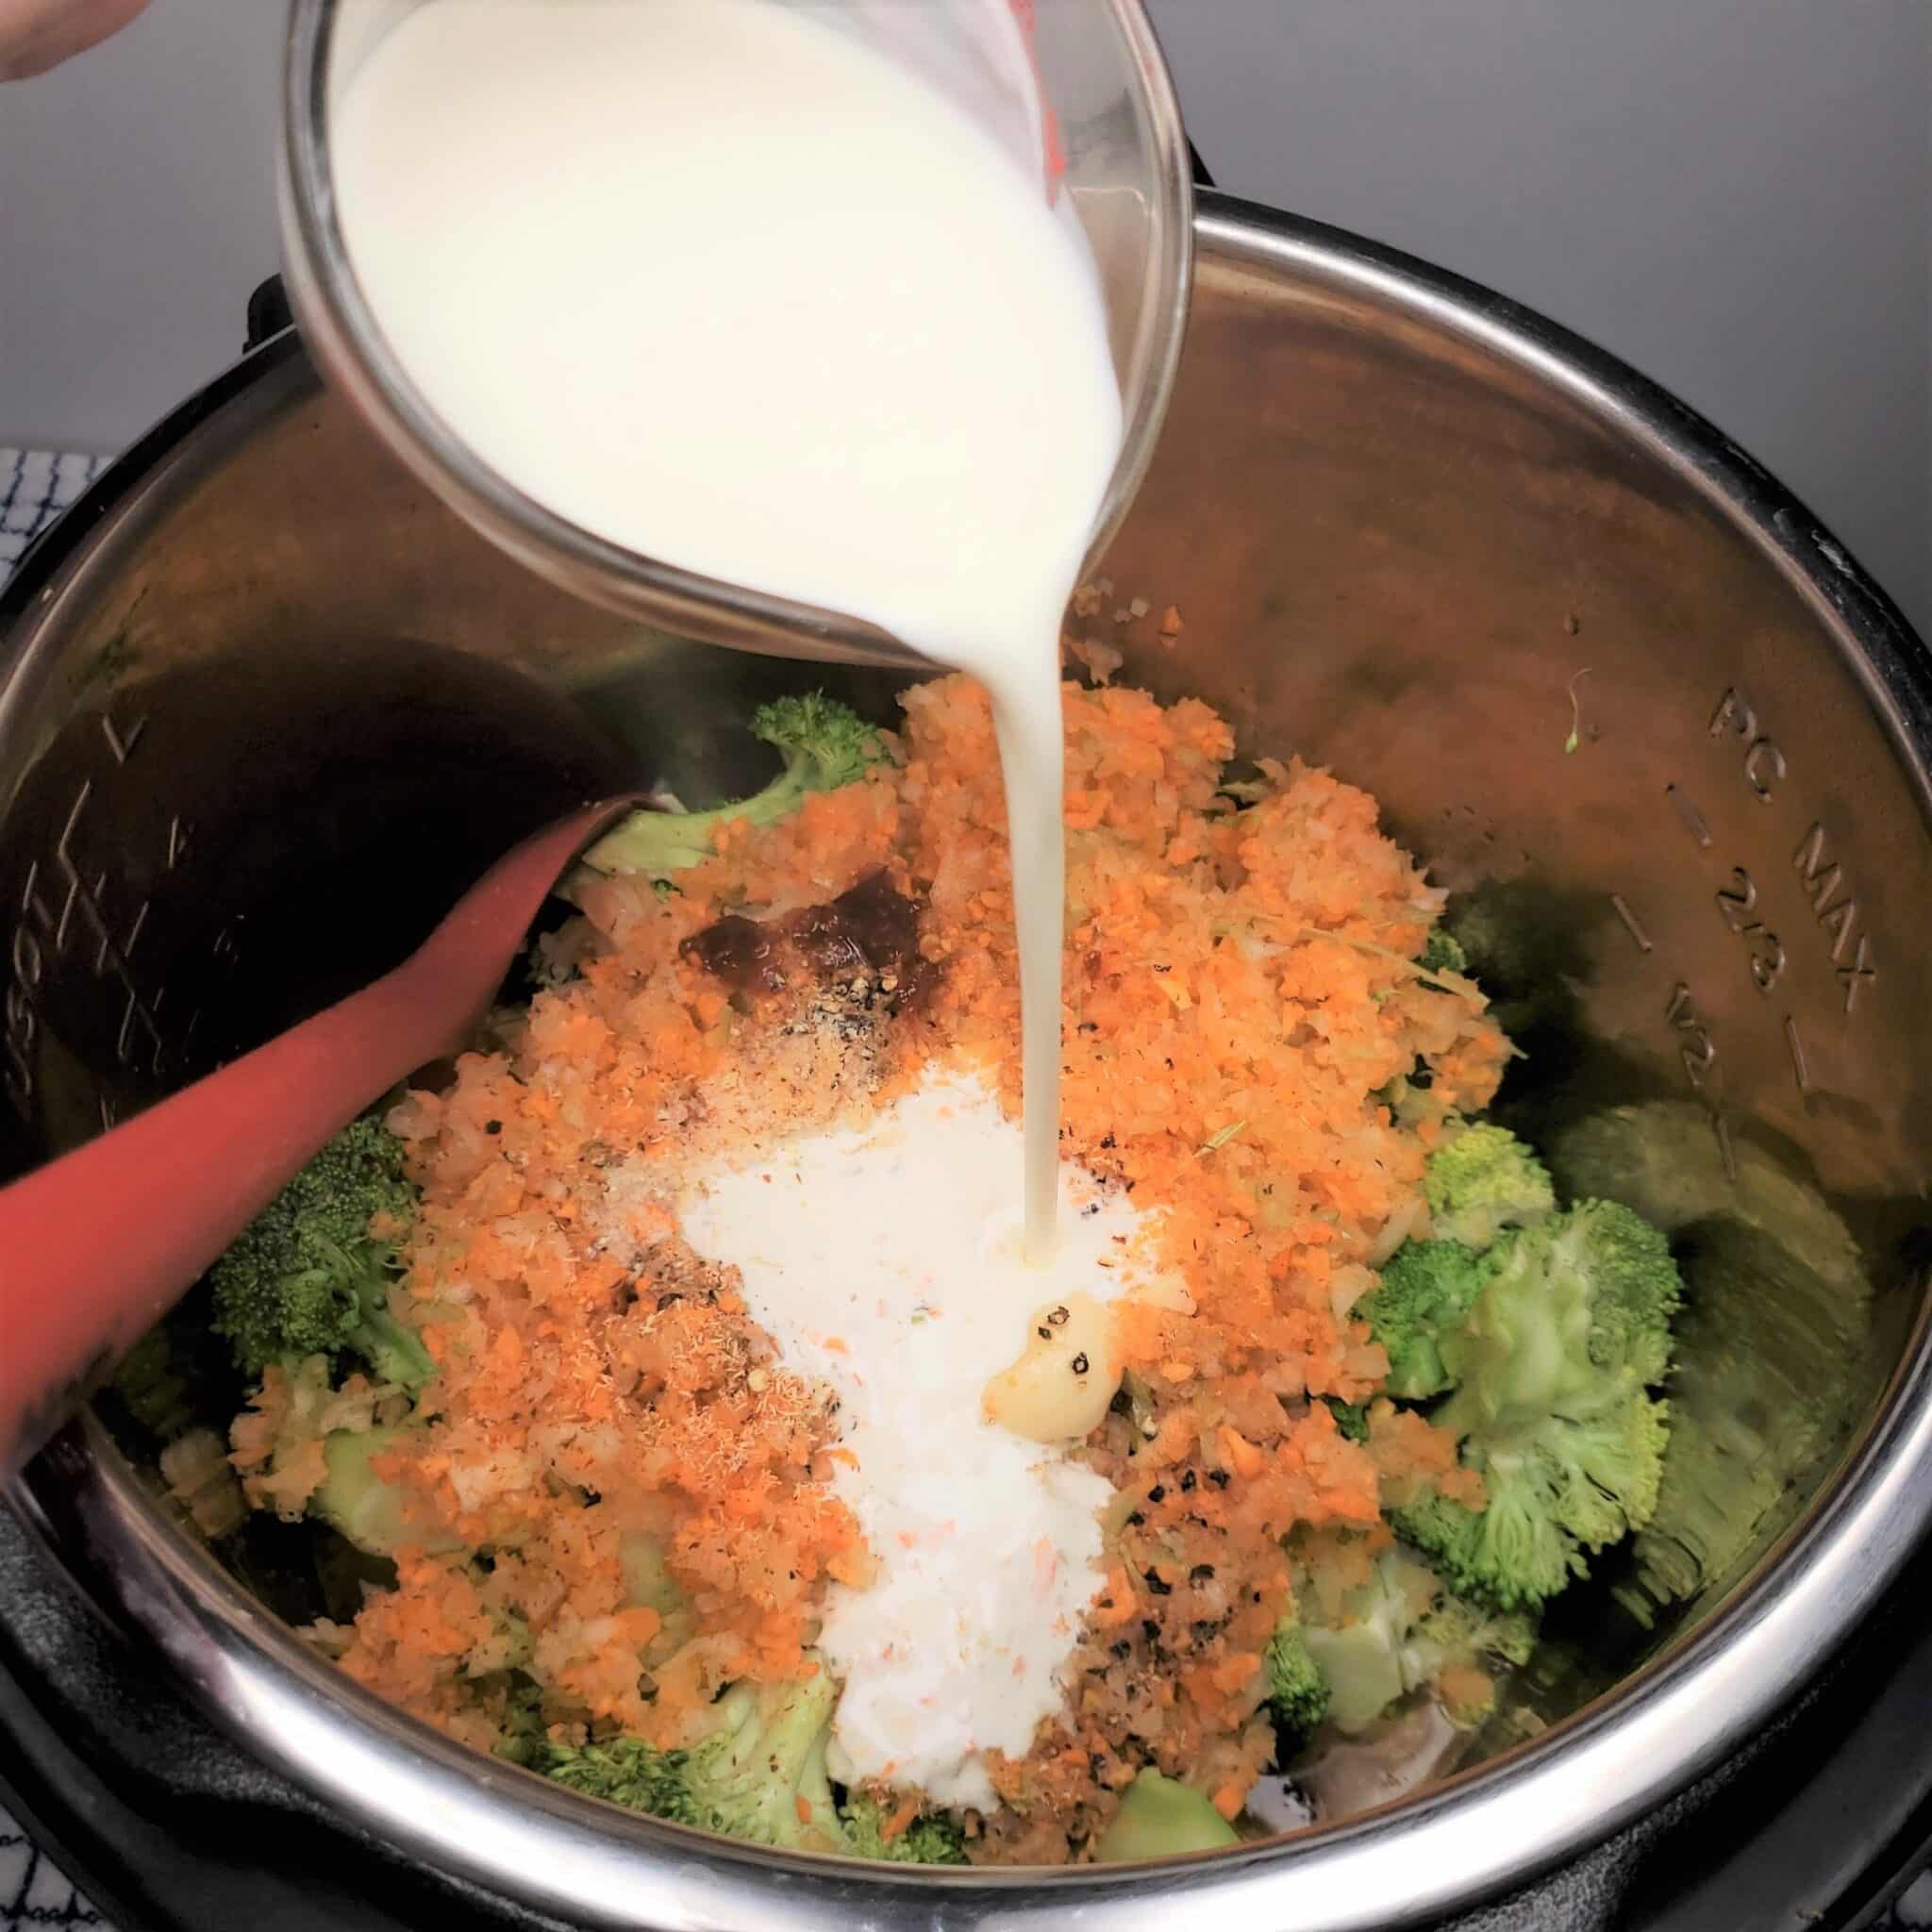 Pour Heavy Cream Over Broccoli and Carrot Mix